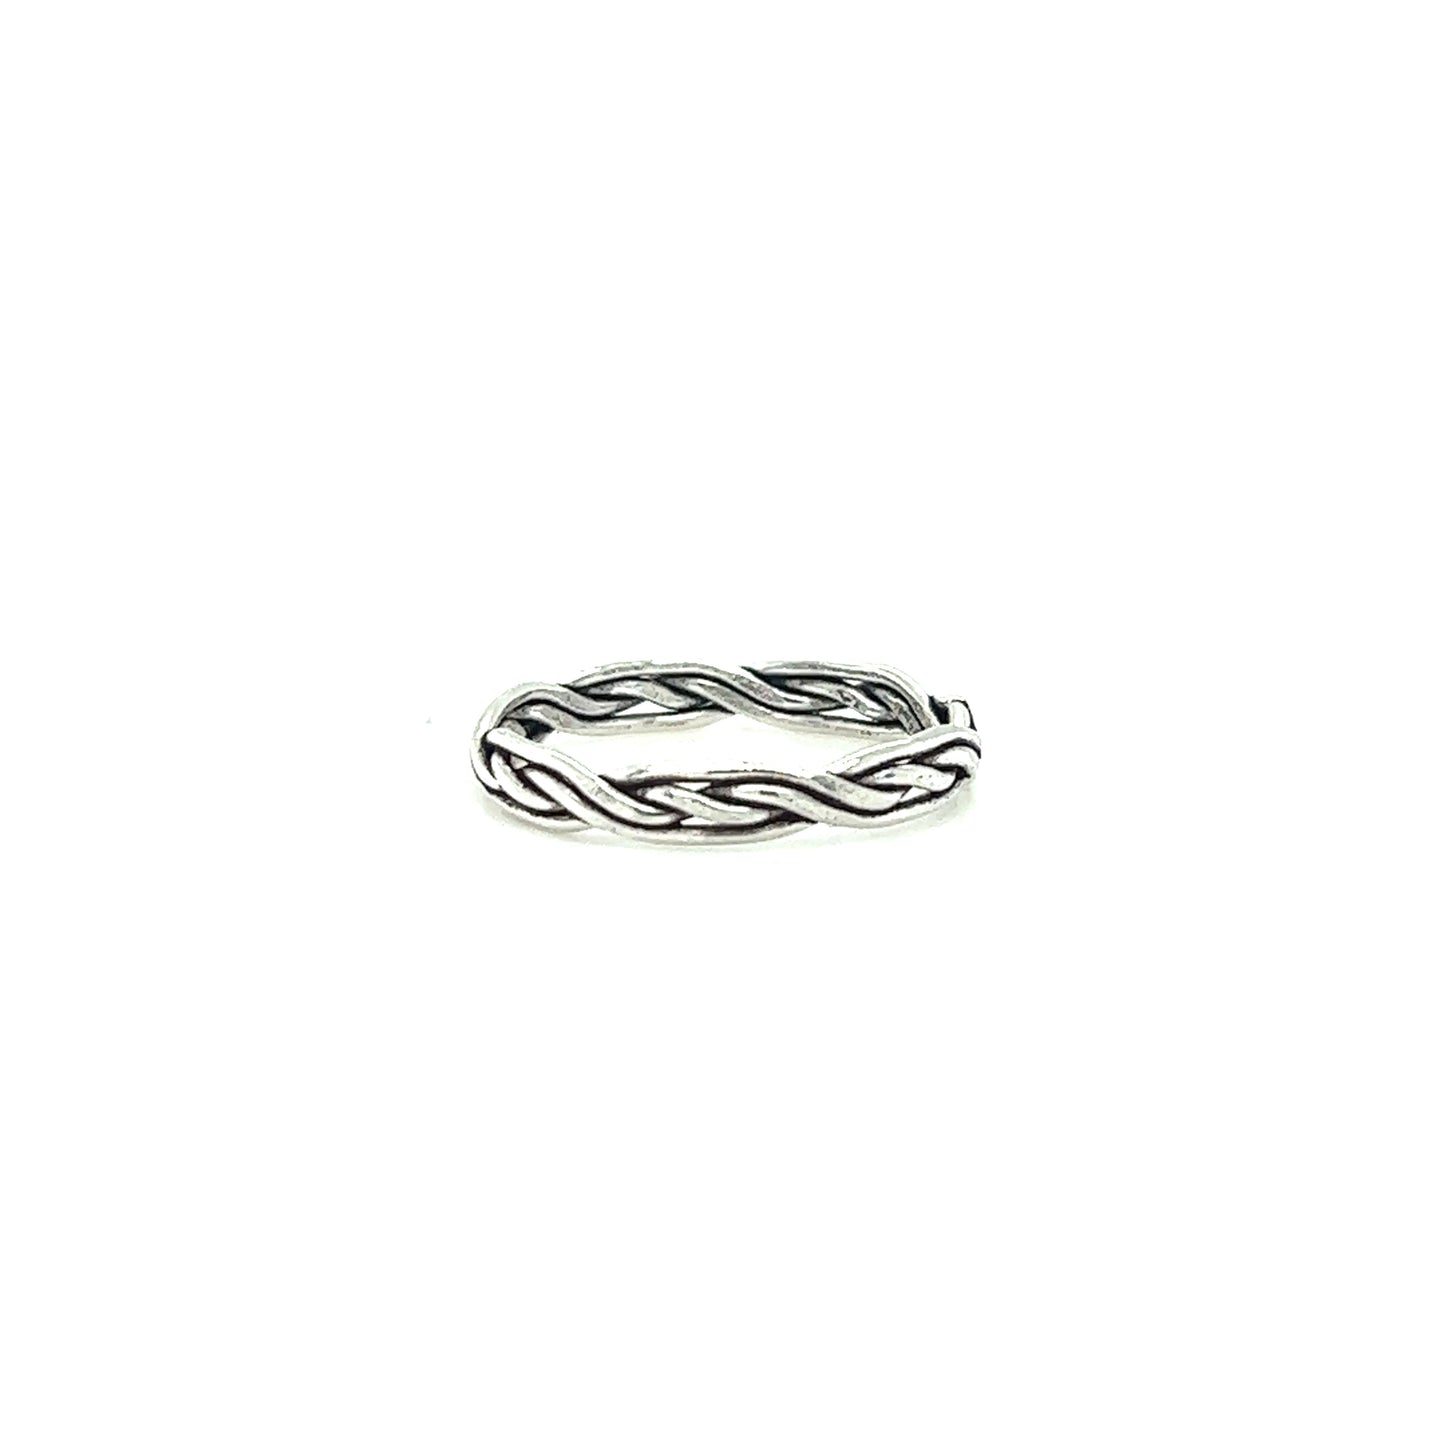 A Sleek Braided Band silver ring from Super Silver.